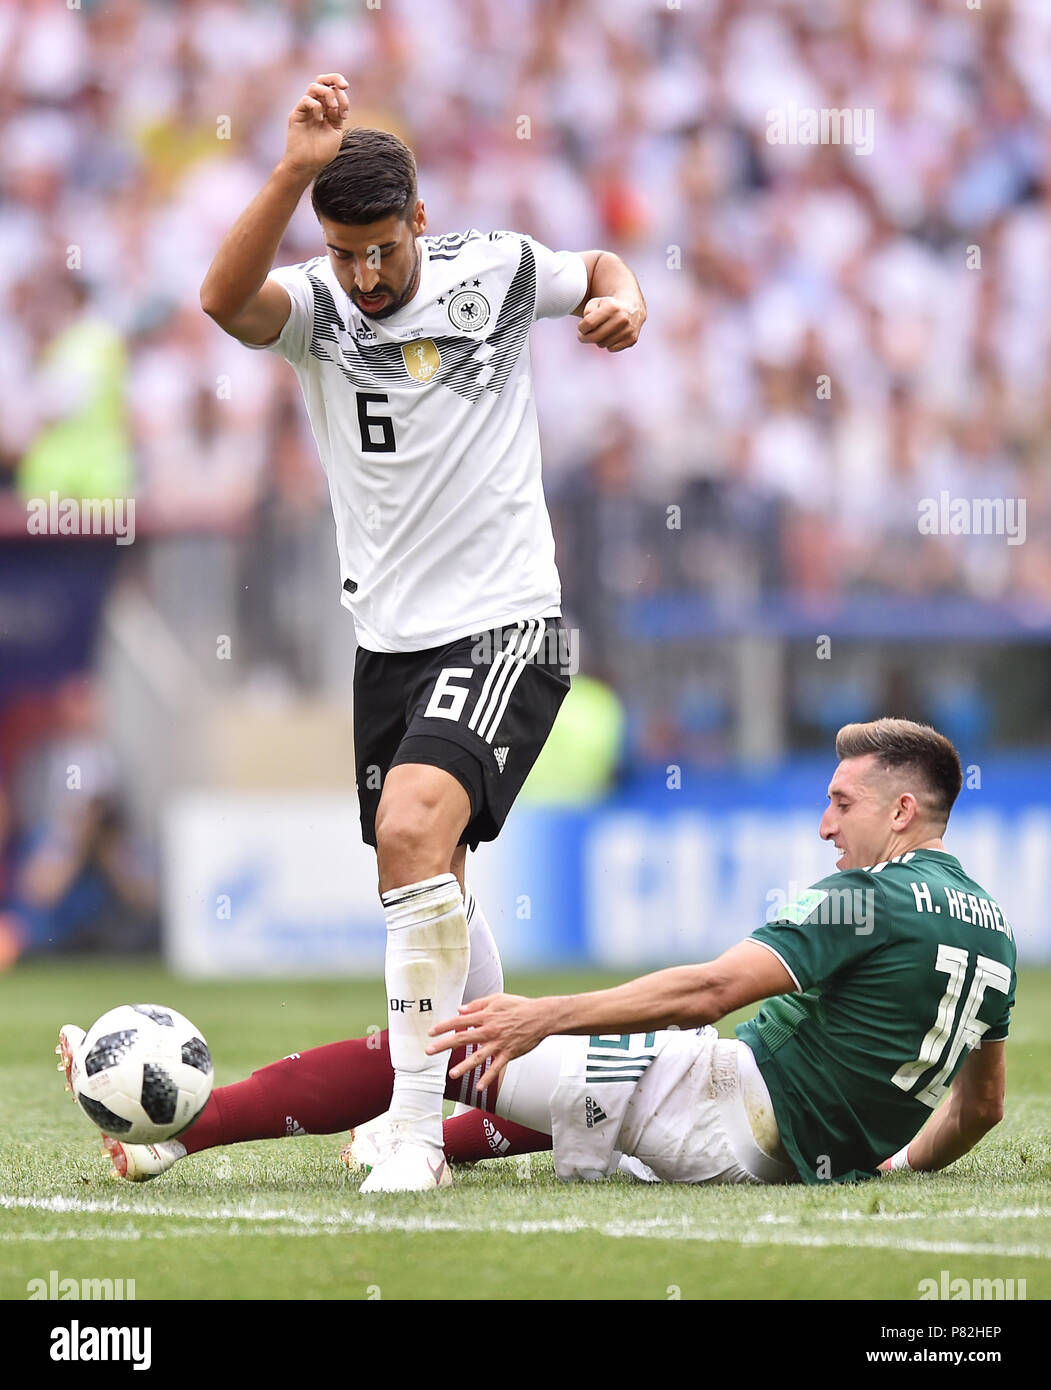 MOSCOW, RUSSIA - JUNE 17: Sami Khedira of Germany competes with Hector Herrera of Mexico during the 2018 FIFA World Cup Russia group F match between Germany and Mexico at Luzhniki Stadium on June 17, 2018 in Moscow, Russia. (Photo by Lukasz Laskowski/PressFocus/MB Media) Stock Photo